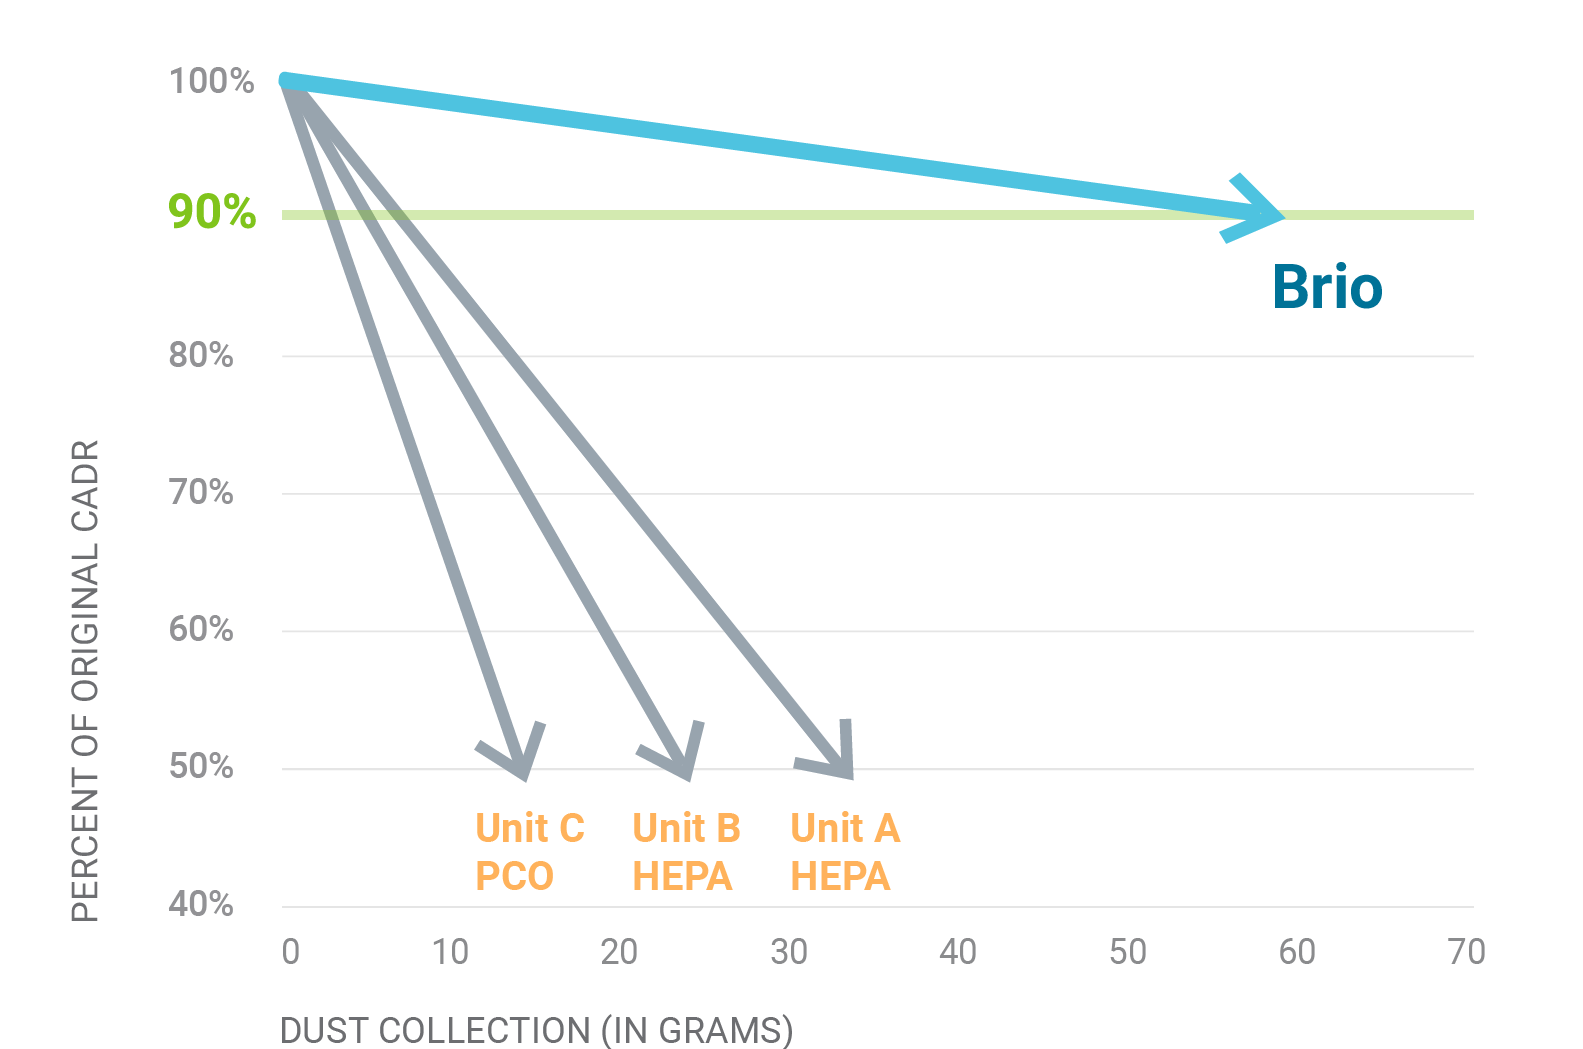 Brio Air Purifier exceeds HEPA air purifiers in clean air delivery rate over time